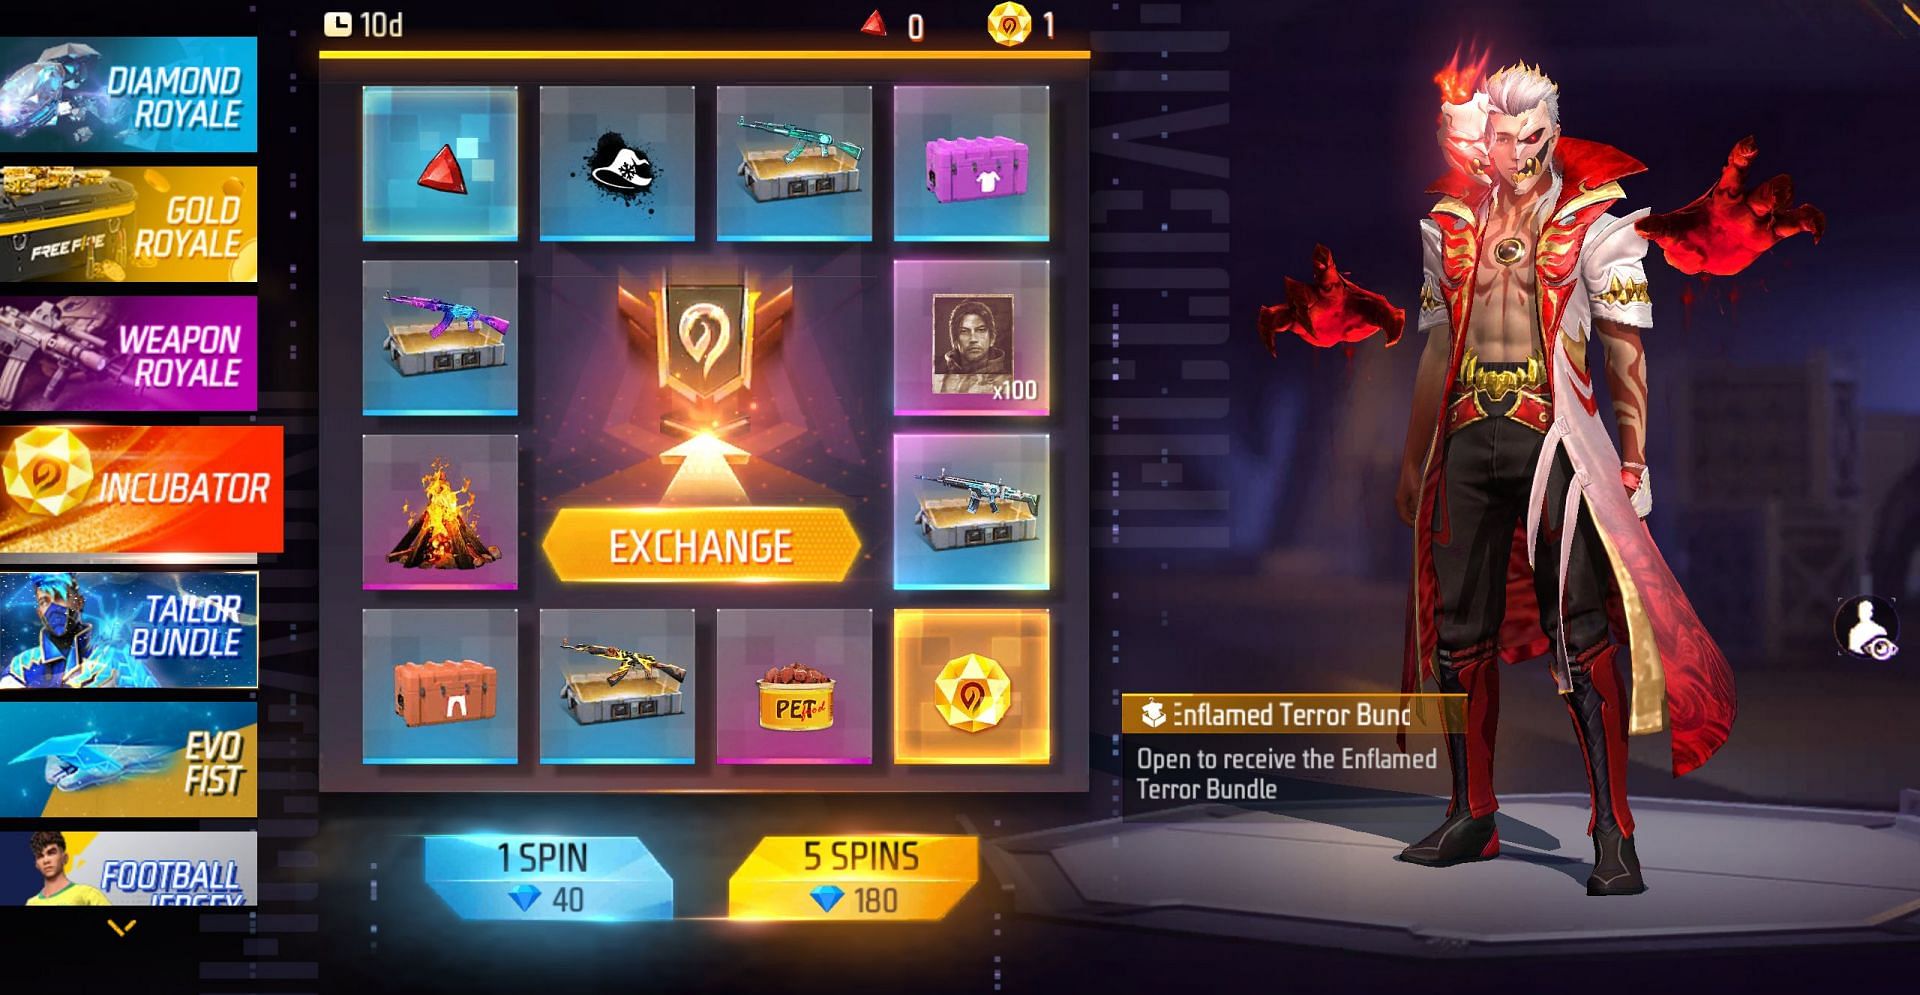 Make spins to receive rewards from the Incubator (Image via Garena)